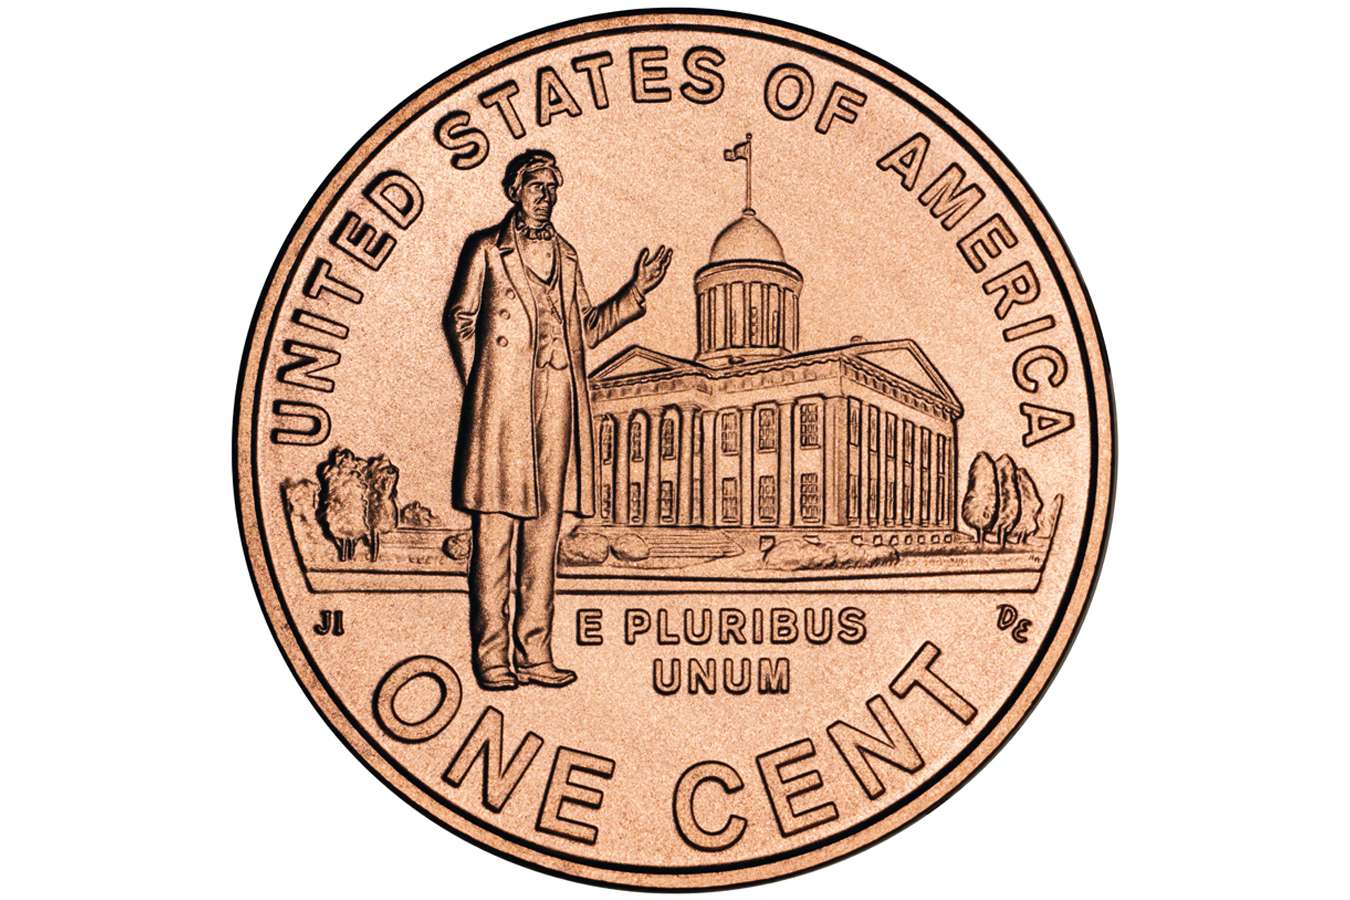 Lincoln's Professional Life in Illinois On the Reverse of the 2009 Lincoln Penny